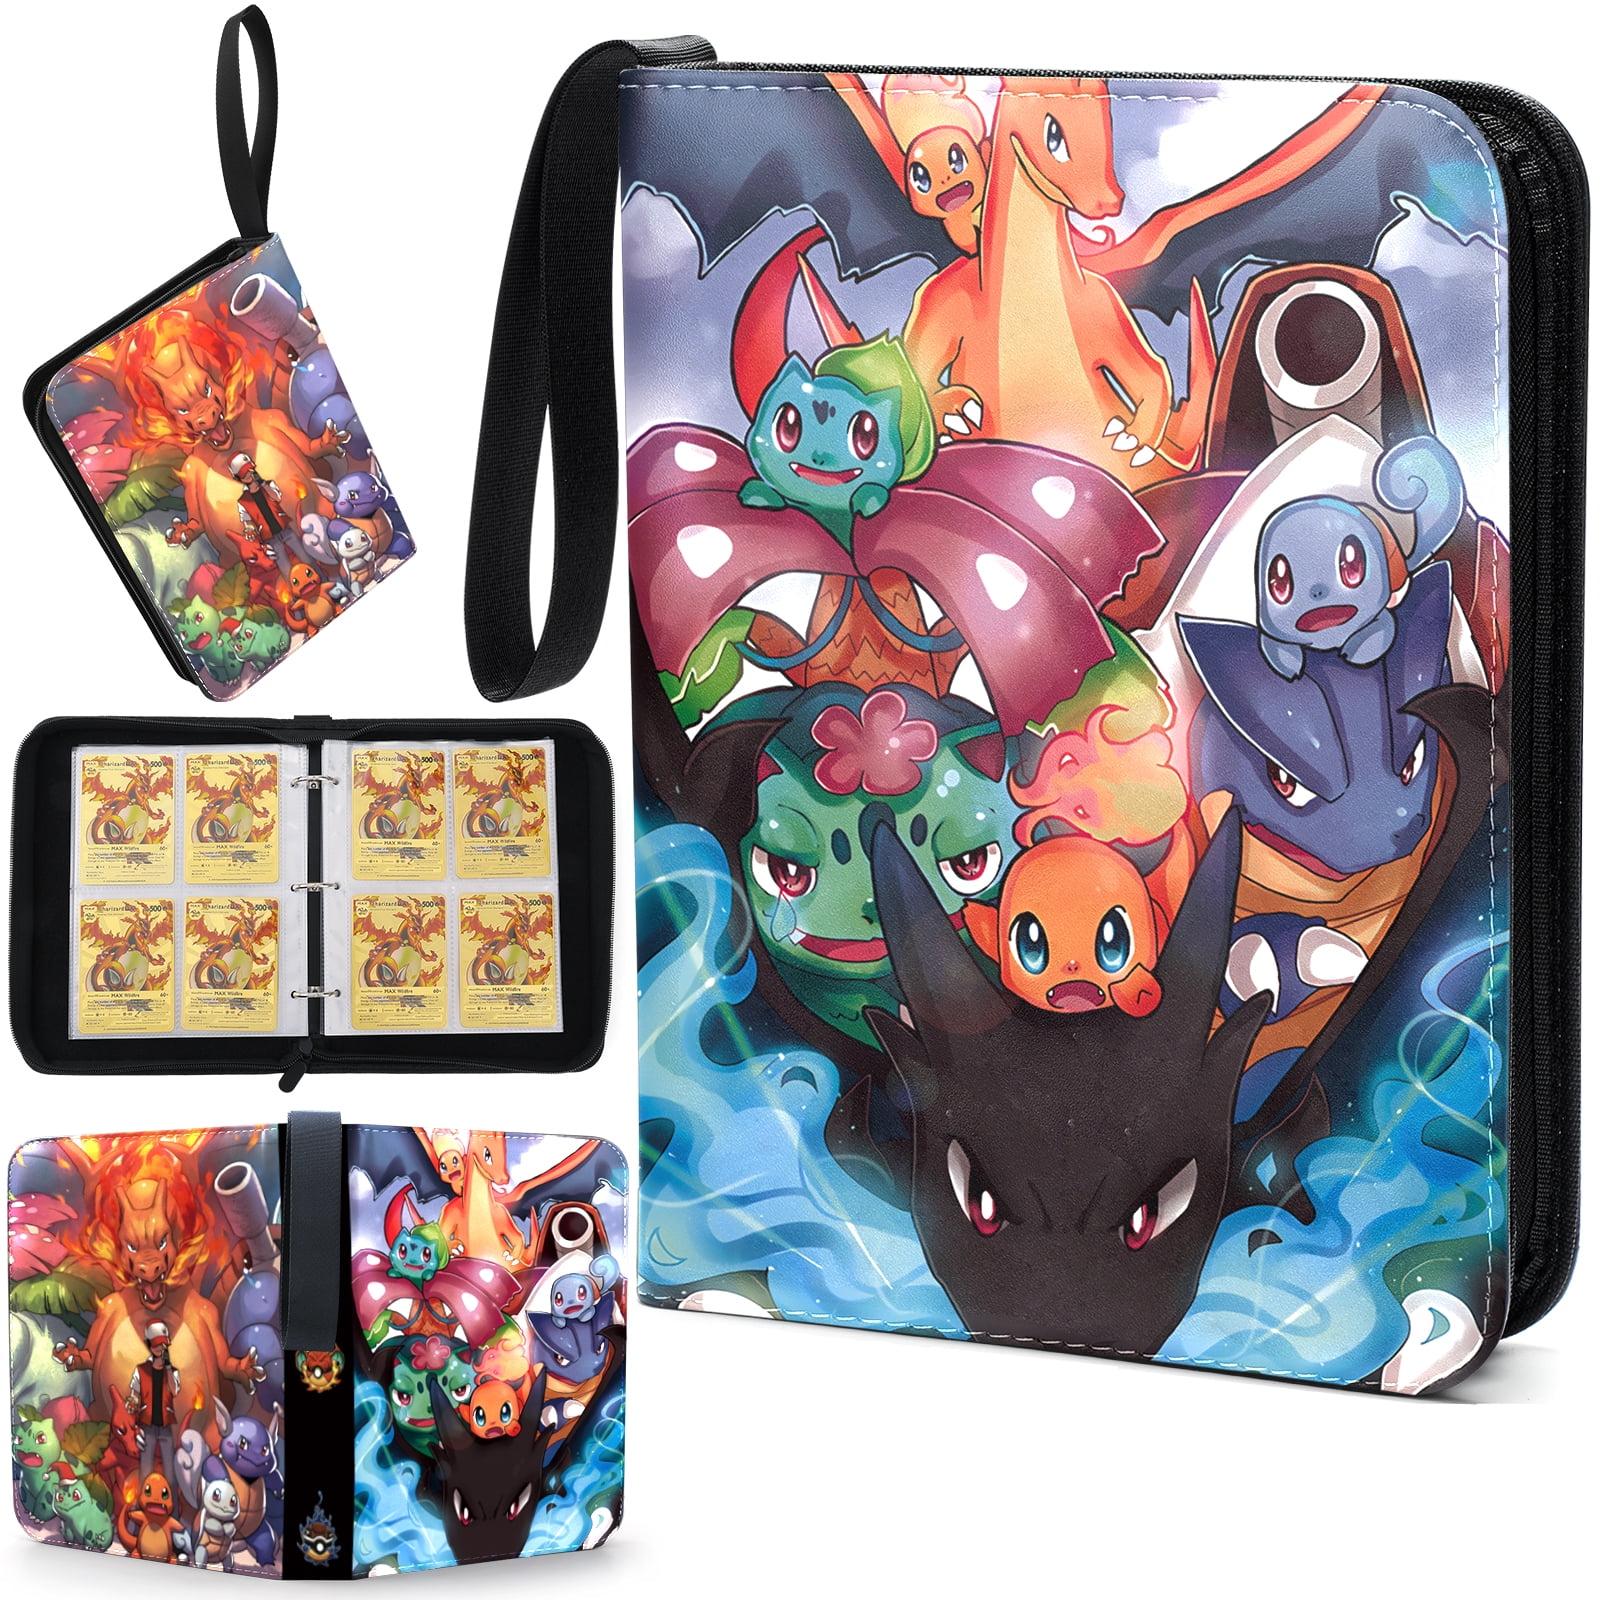 Trading Card Binder for Pokemon, Card Book Holder with 4Pocket for TCG